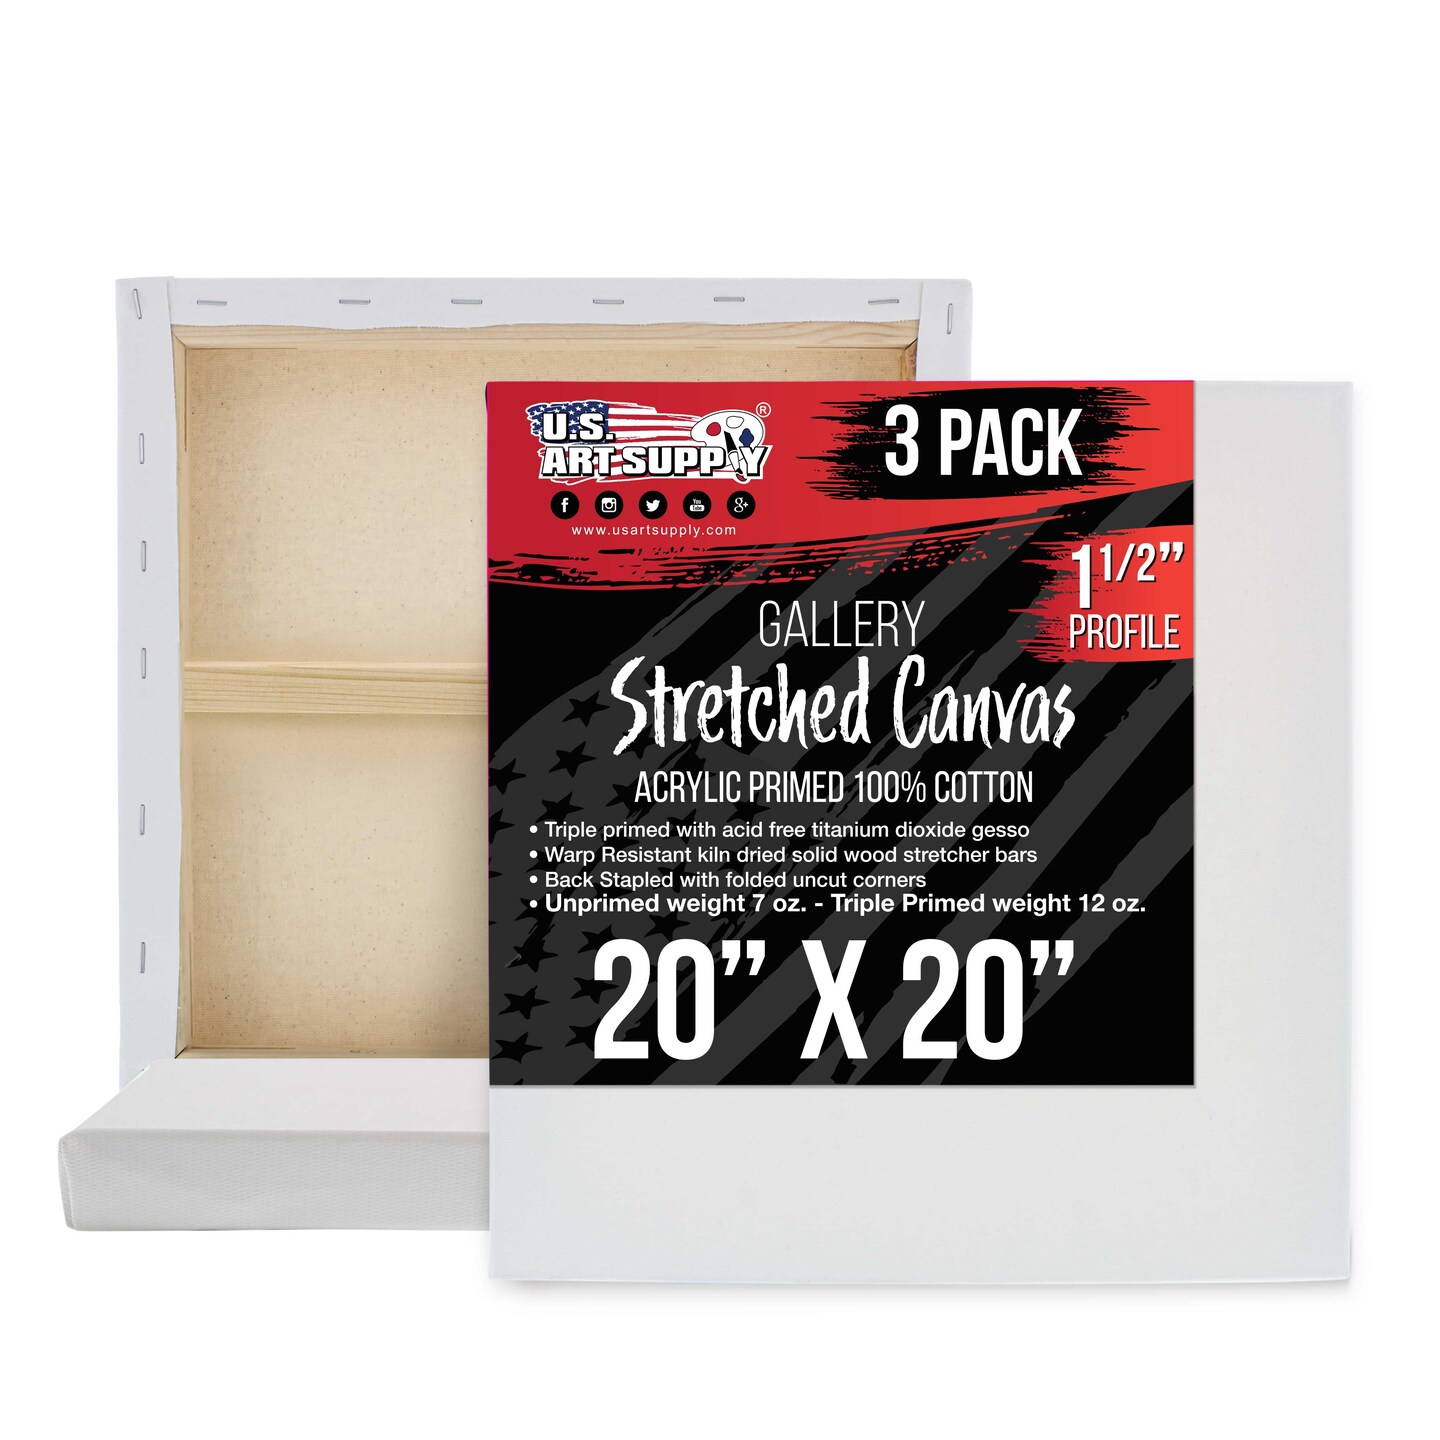 20 x 20 inch Gallery Depth 1-1/2&#x22; Profile Stretched Canvas, 3-Pack - 12-Ounce Acrylic Gesso Triple Primed, - Professional Artist Quality, 100% Cotton